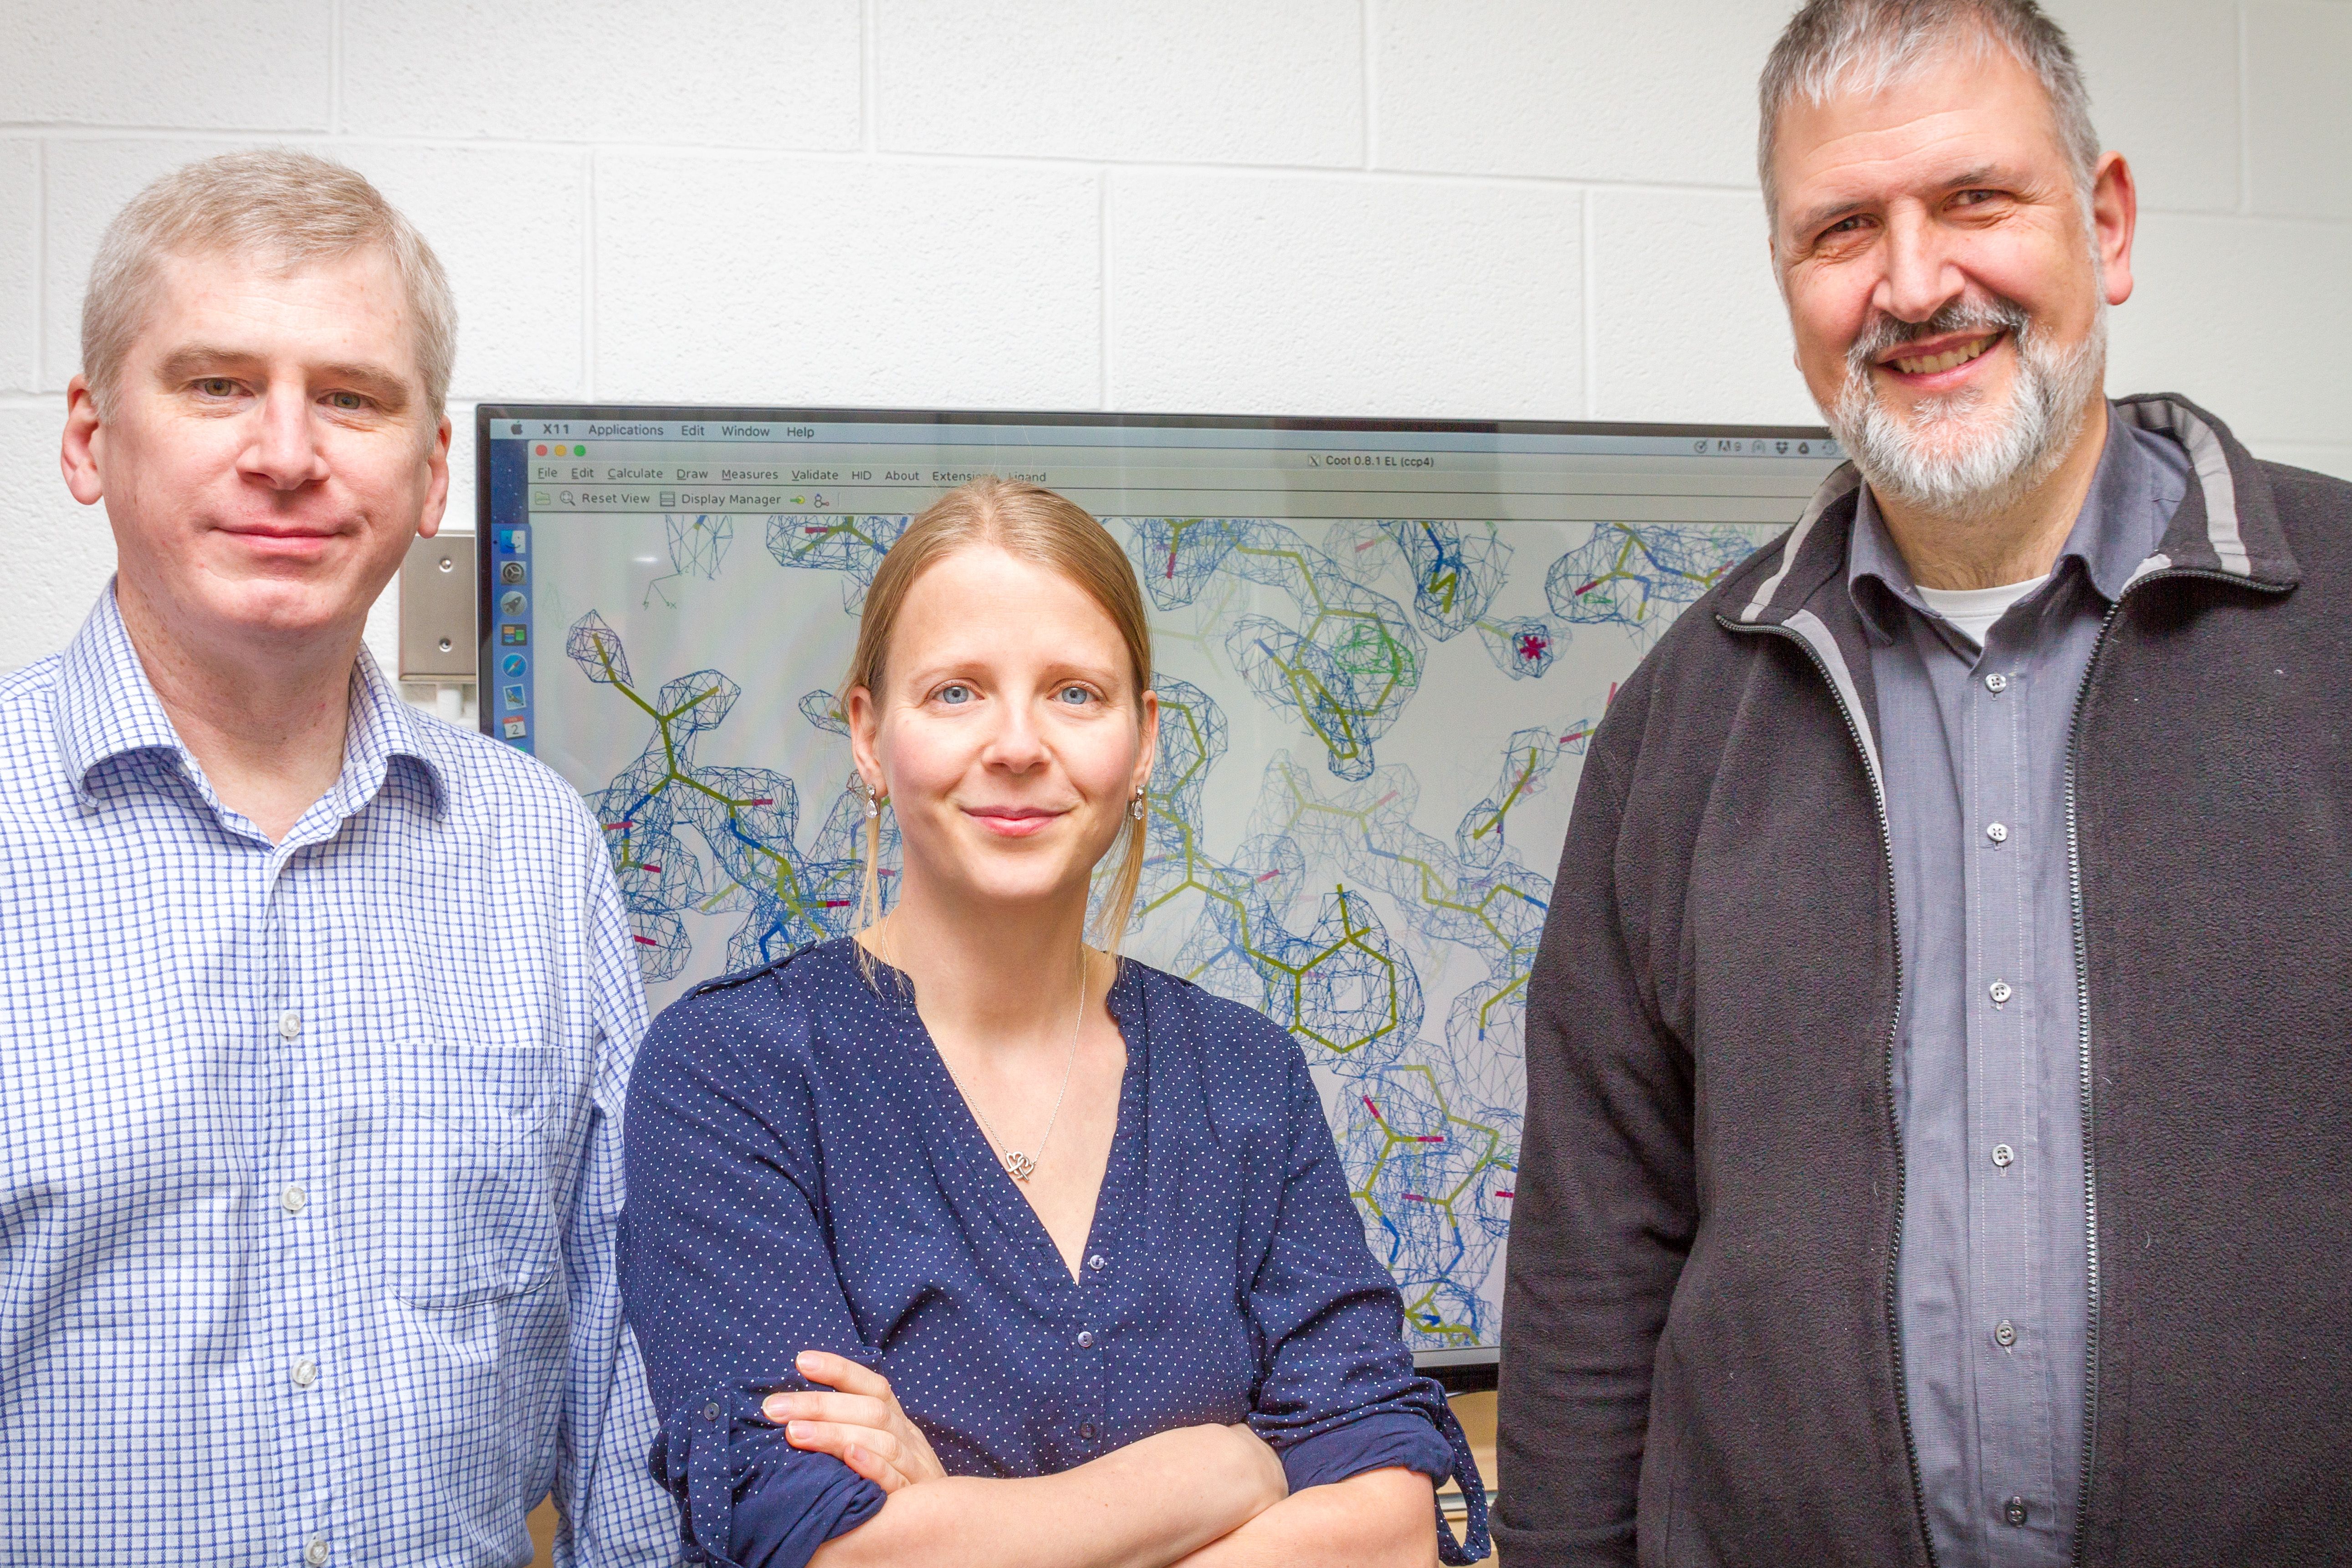 From left, authors Bryan T. Eger, Jana Broecker, and Prof. Oliver P. Ernst